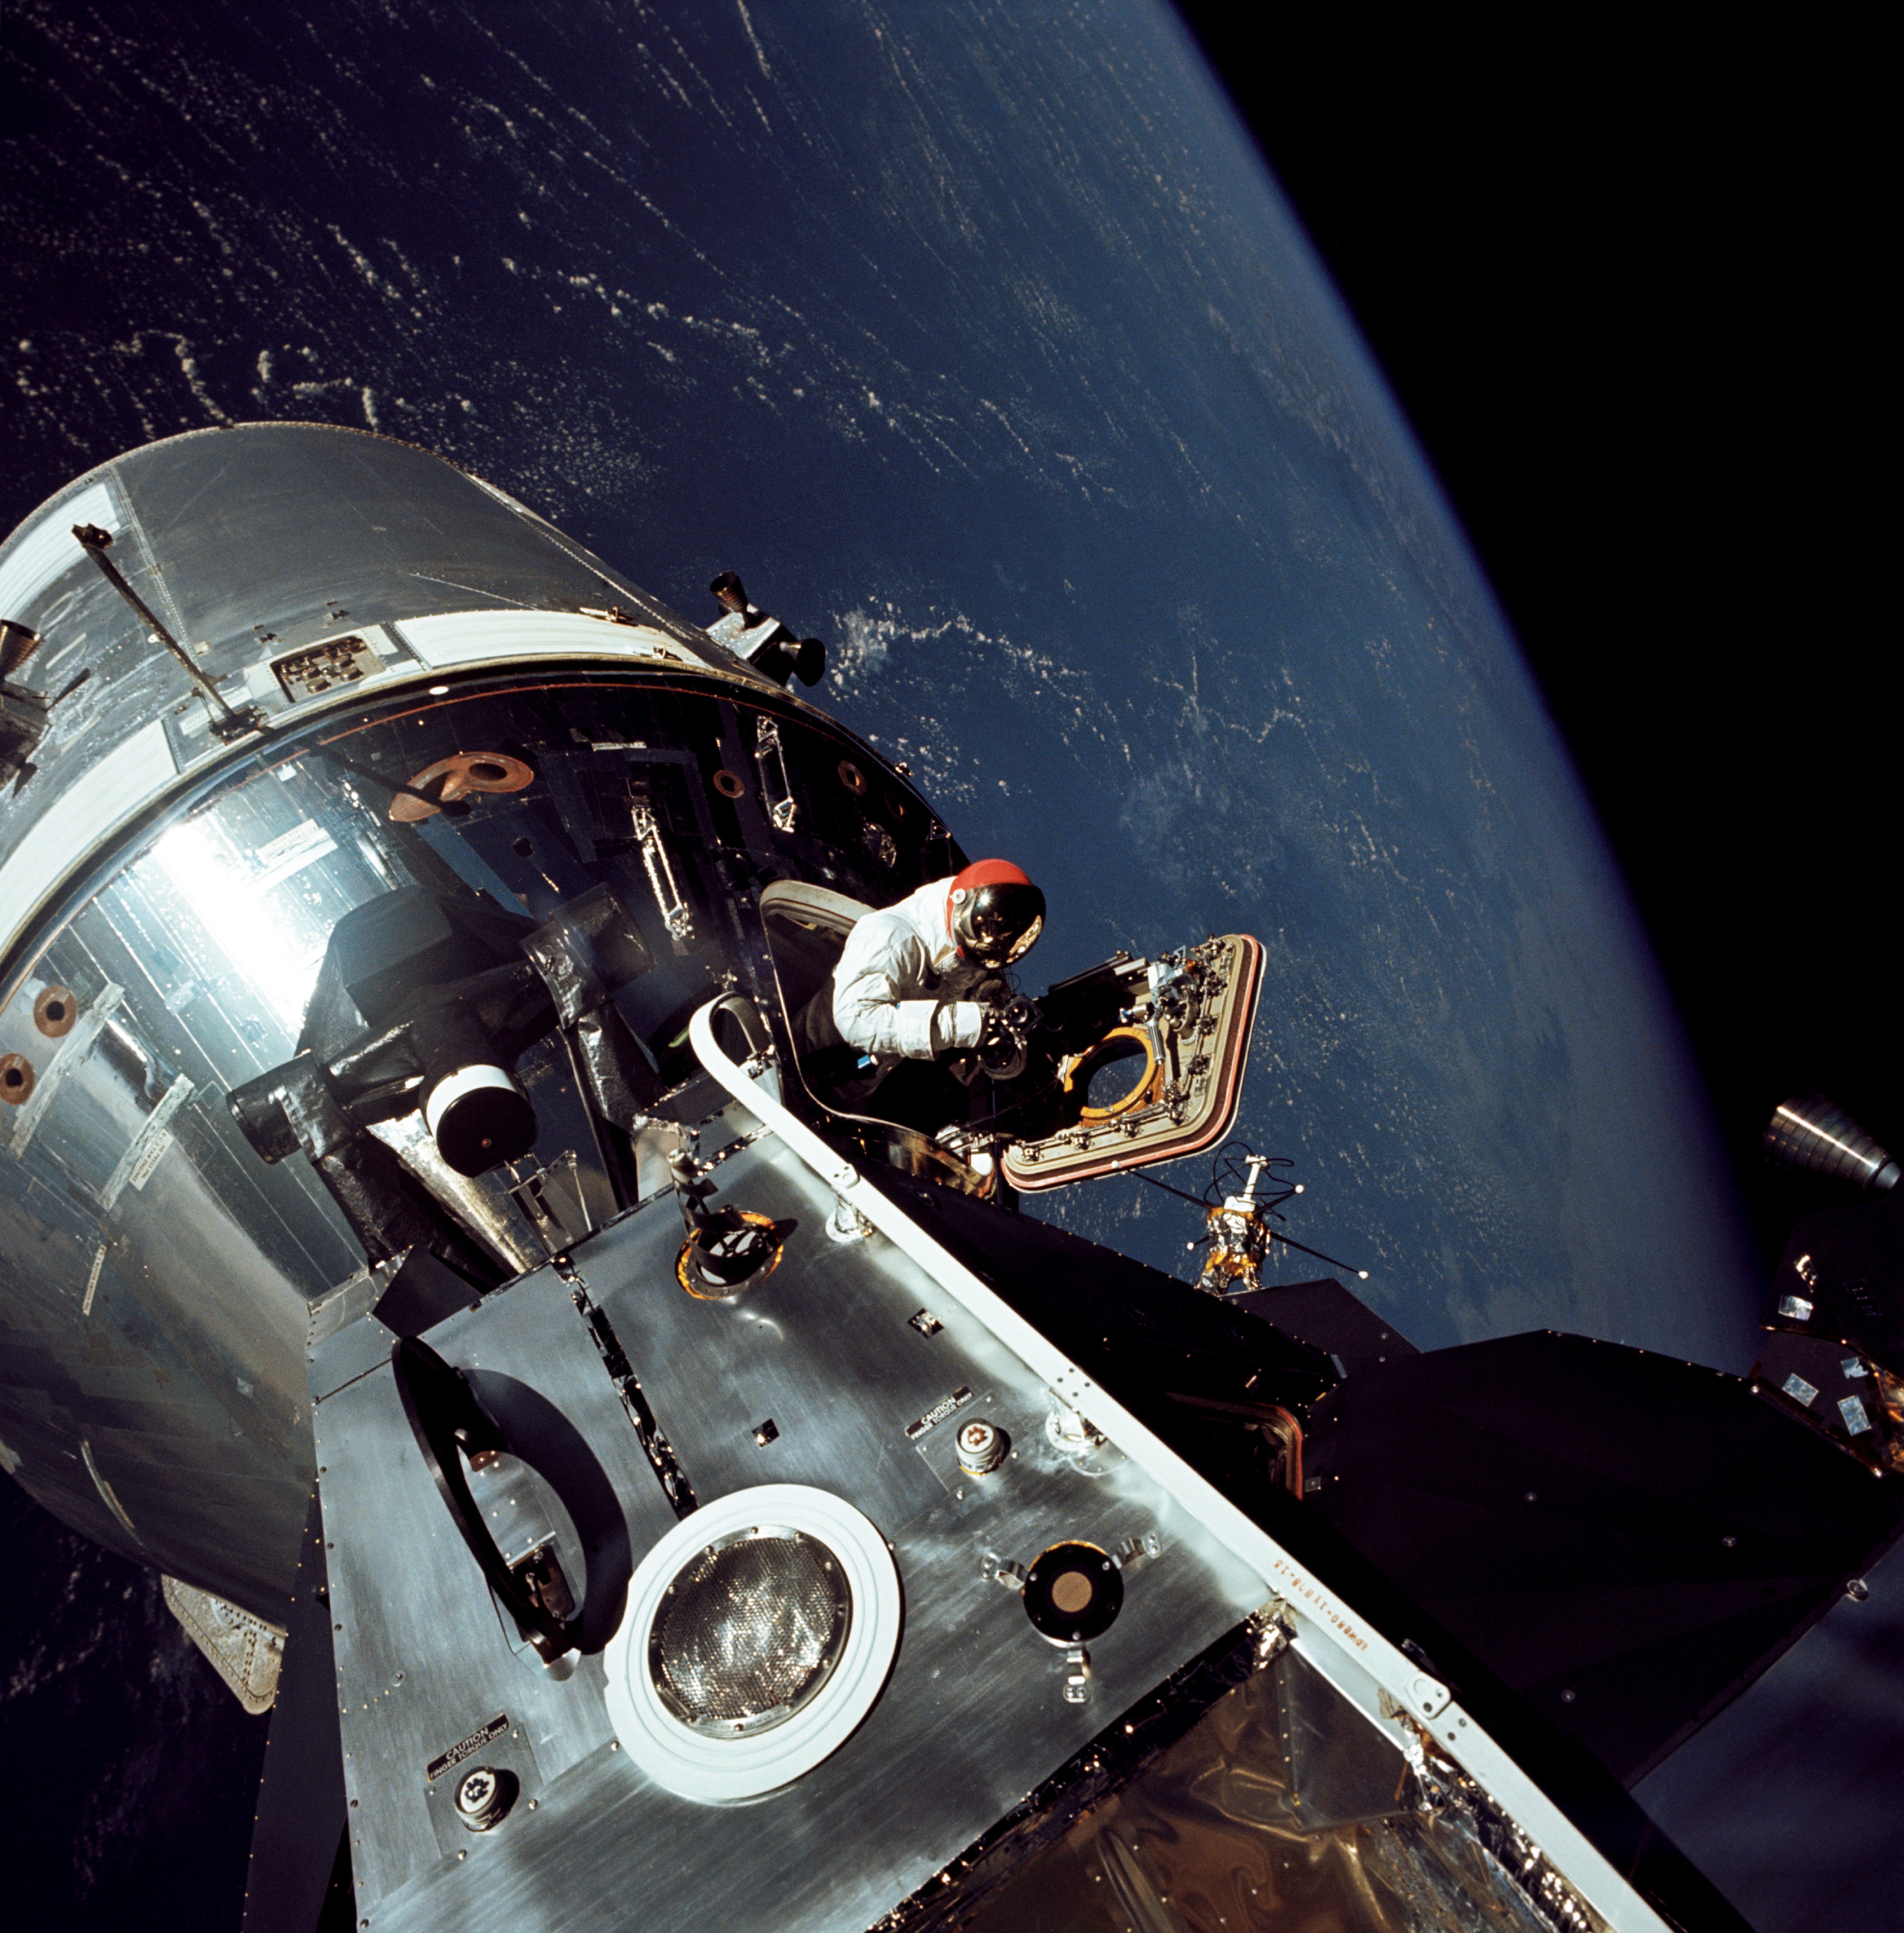 Earth is a deep blue backdrop to this photo of astronaut David Scott and the command module and lunar module of the Apollo 9 mission. The joined modules are a metallic silver. He stands in the open hatch of the command module while wearing a white spacesuit. A metallic visor tops his red helmet.